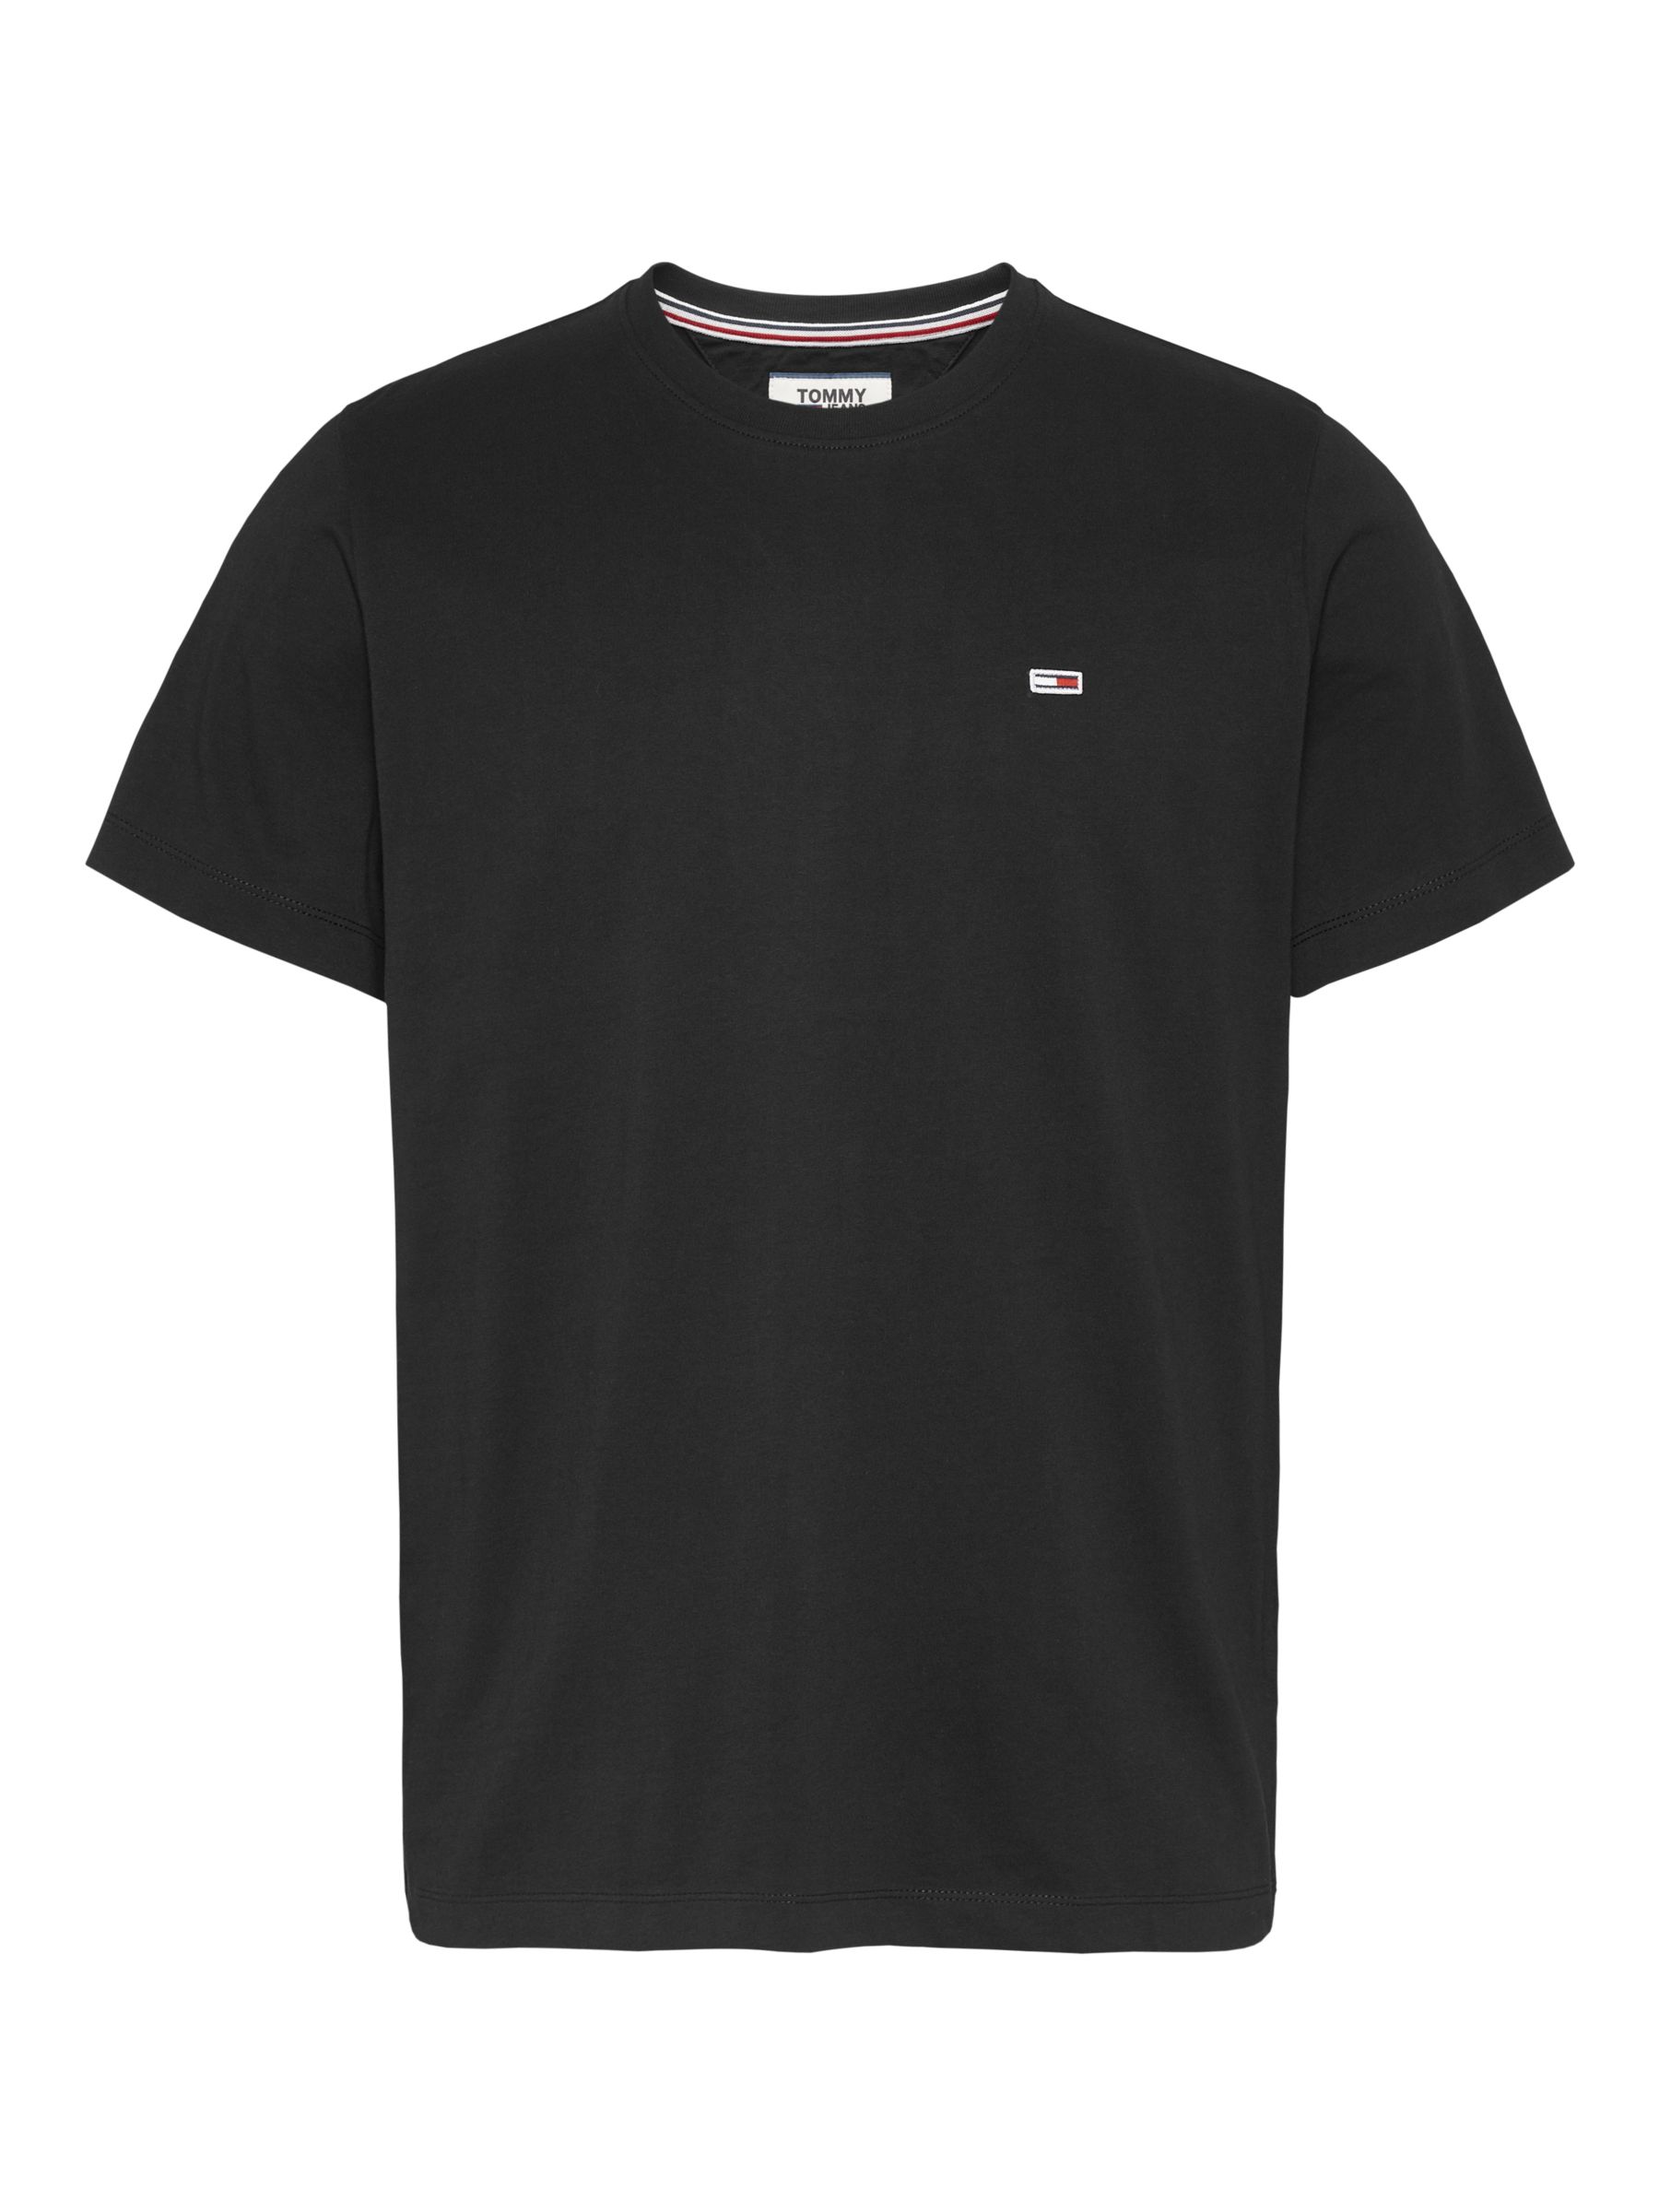 Buy Tommy Jeans Jersey Crew Neck Tee Online at johnlewis.com